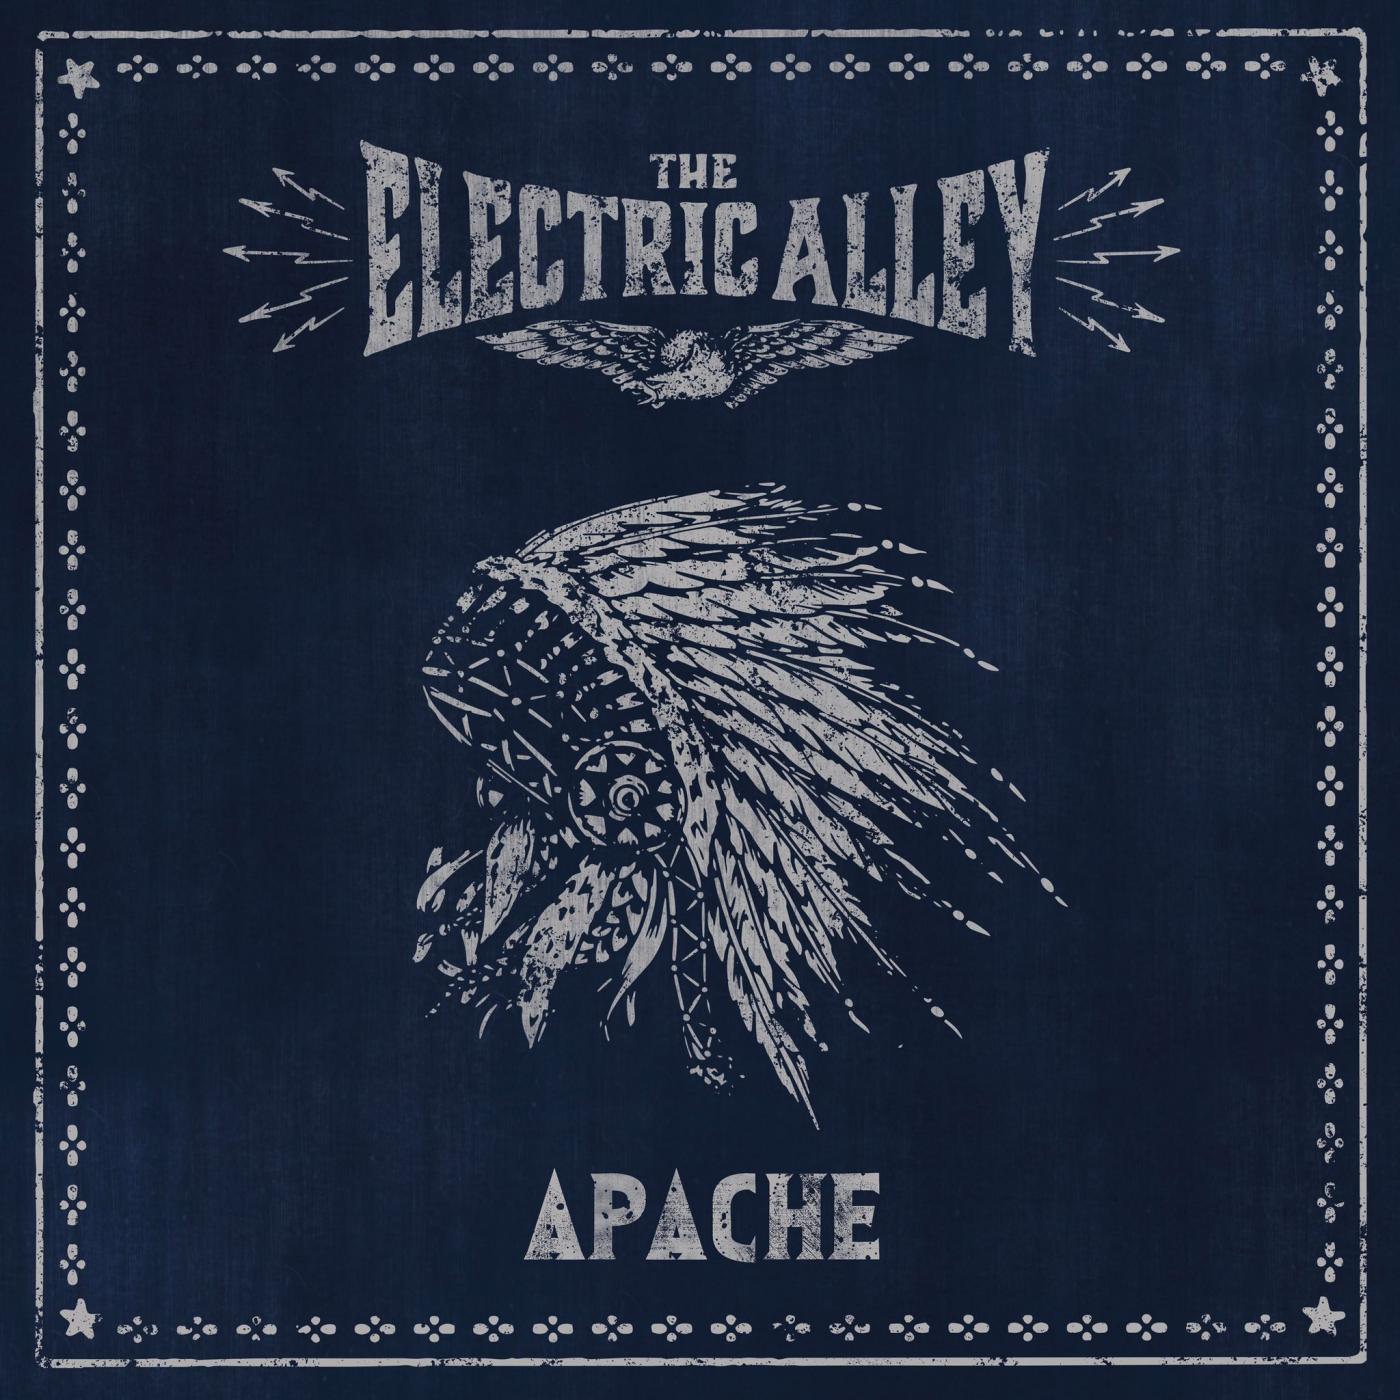 The Electric Alley – Apache